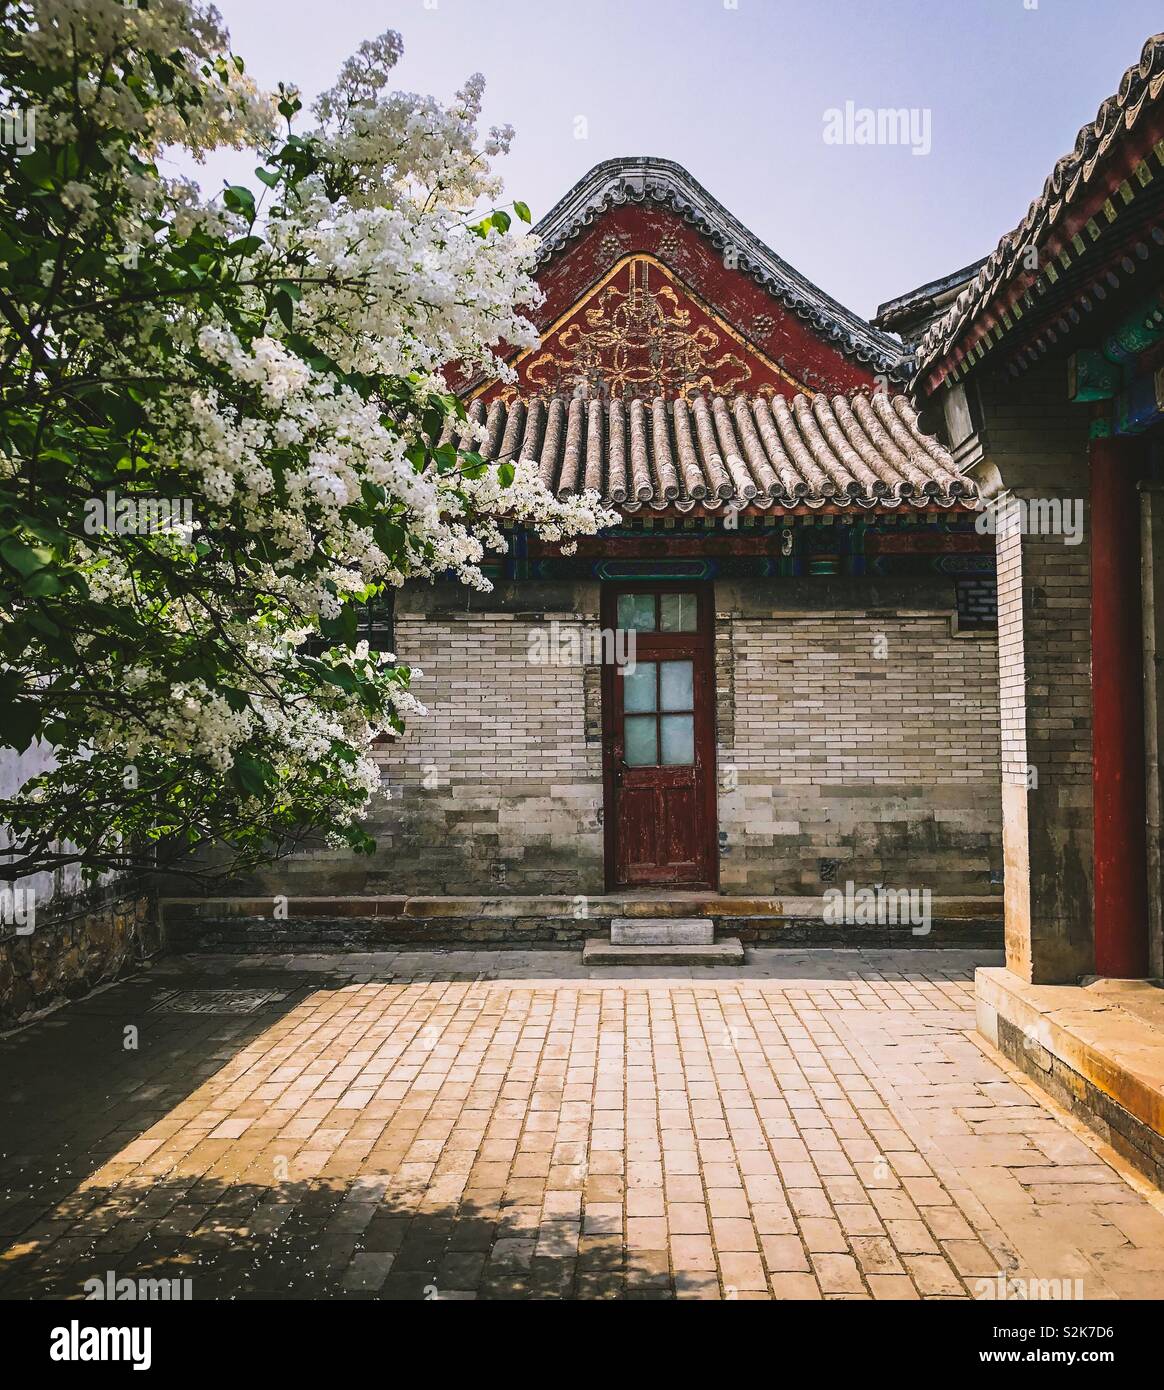 Court yard with house with ornate gabel and door next to a flowering tree, inside the Forbidden City, Beijing, China Stock Photo